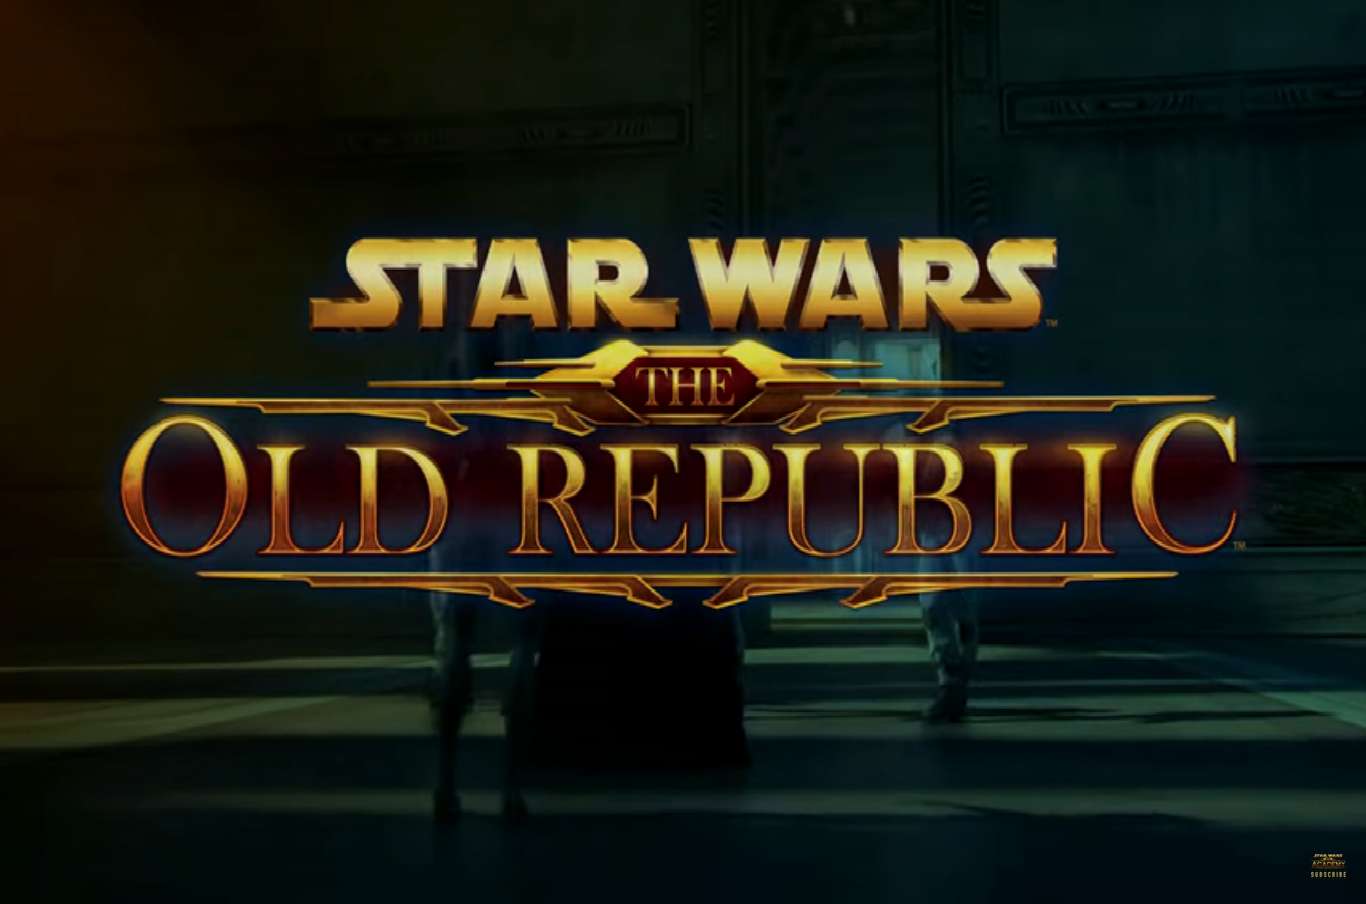 Star Wars The Old Republic To Update The Bonuses Series Missions To Be More In Line With The Current Landscape